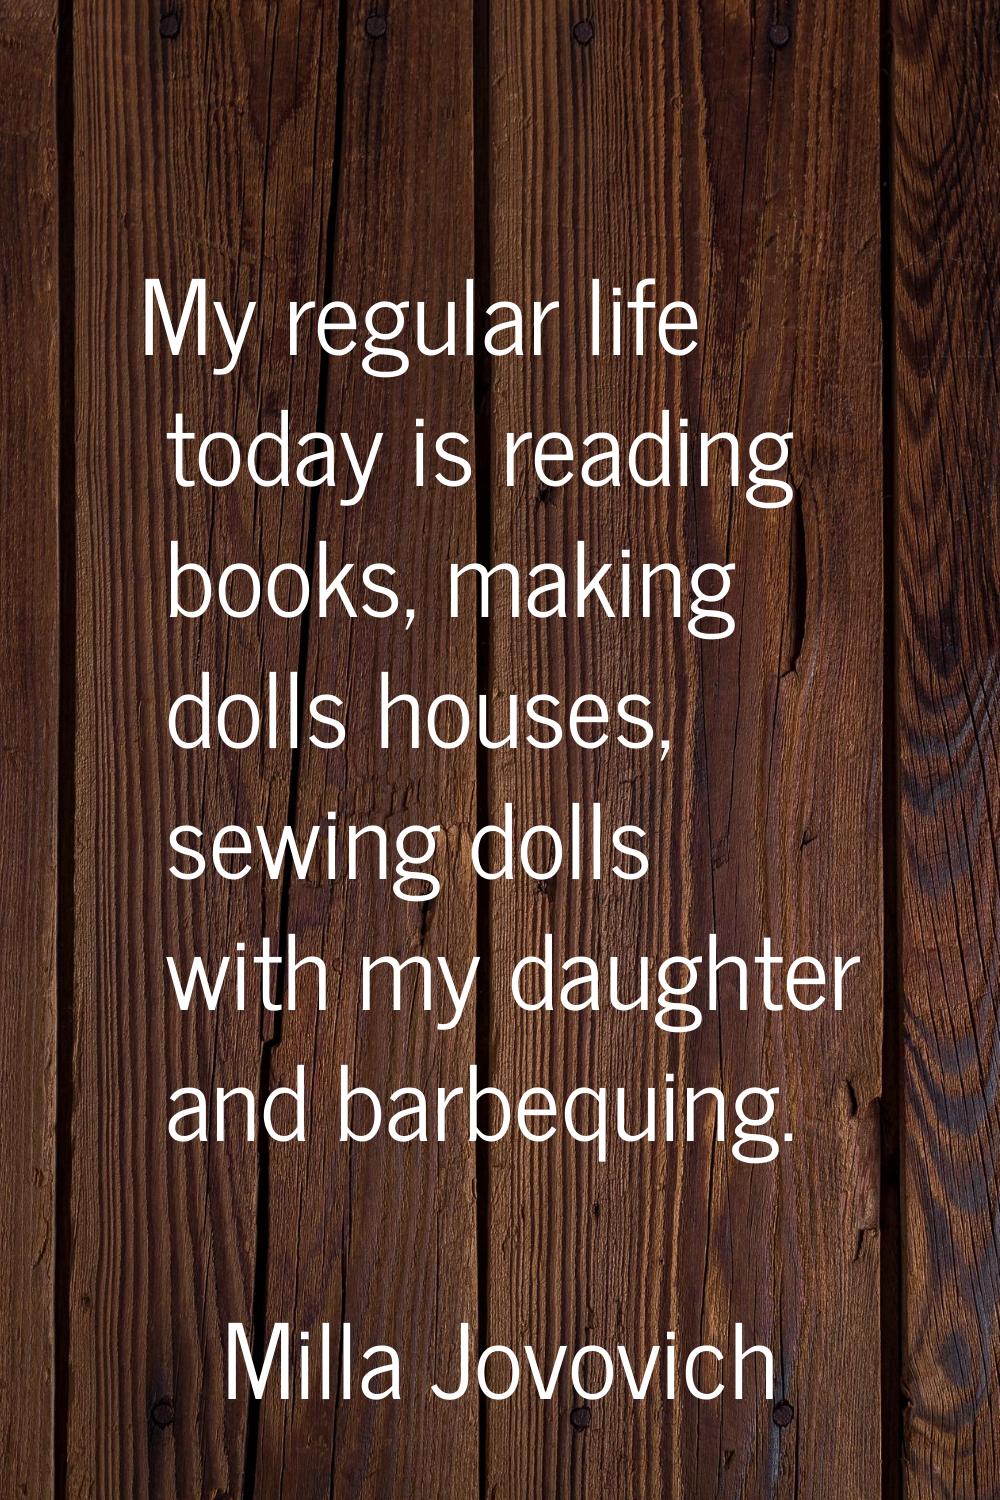 My regular life today is reading books, making dolls houses, sewing dolls with my daughter and barb